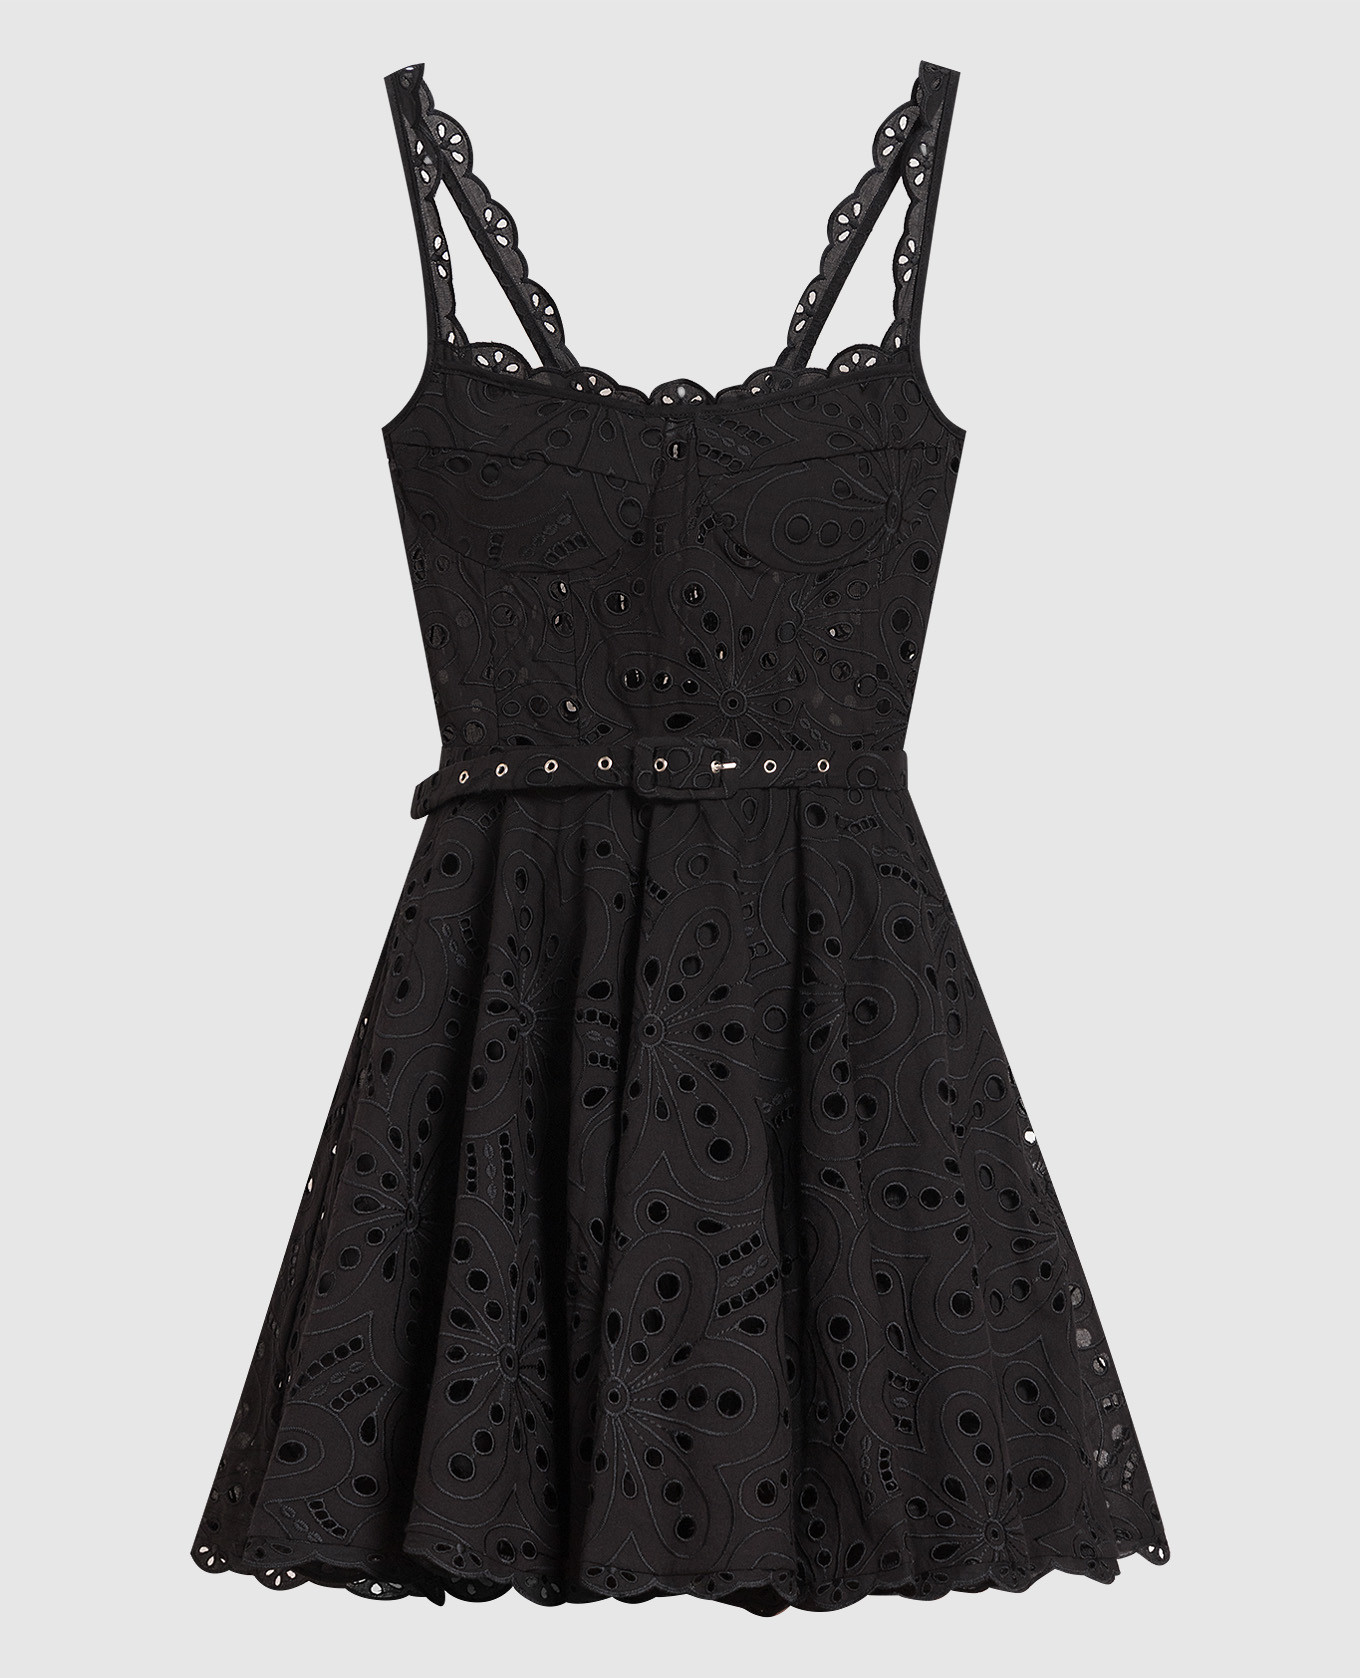 Nina black bustier dress with broderie embroidery